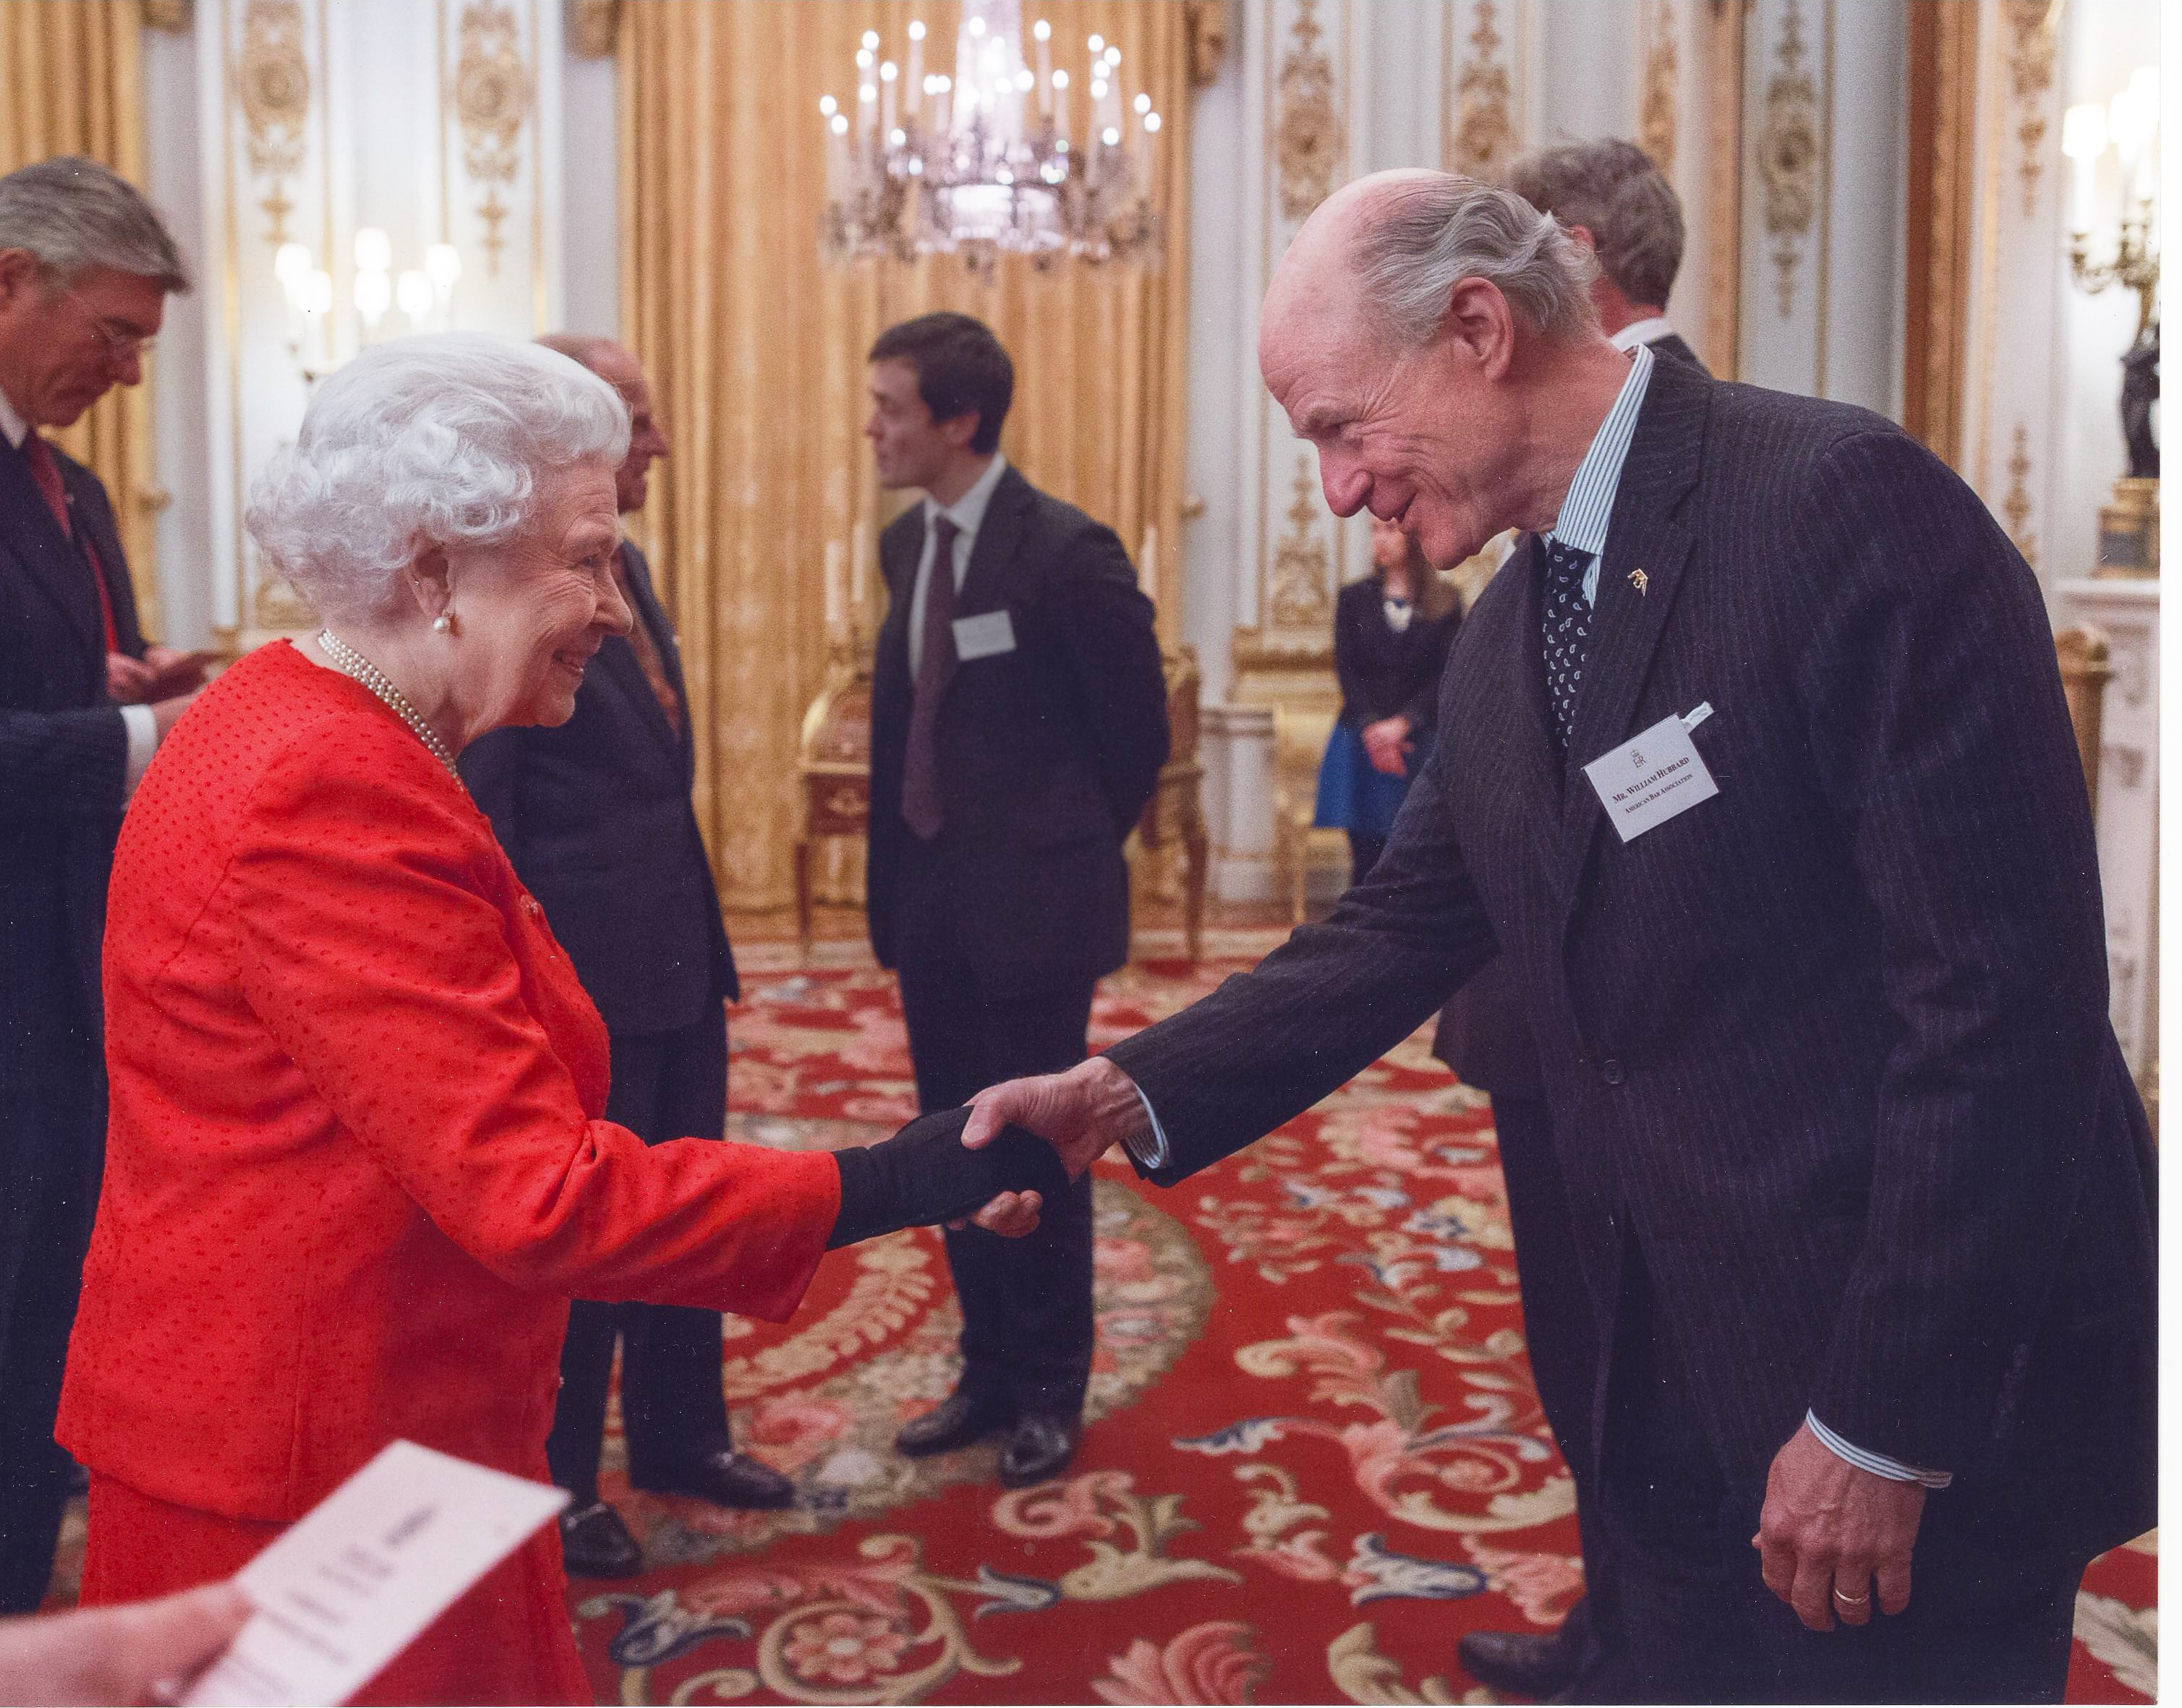 William Hubbard first met Her Majesty, Queen Elizabeth II 
in February 2015 at 
a reception at Buckingham Palace held in connection with the Global Law Summit. 
